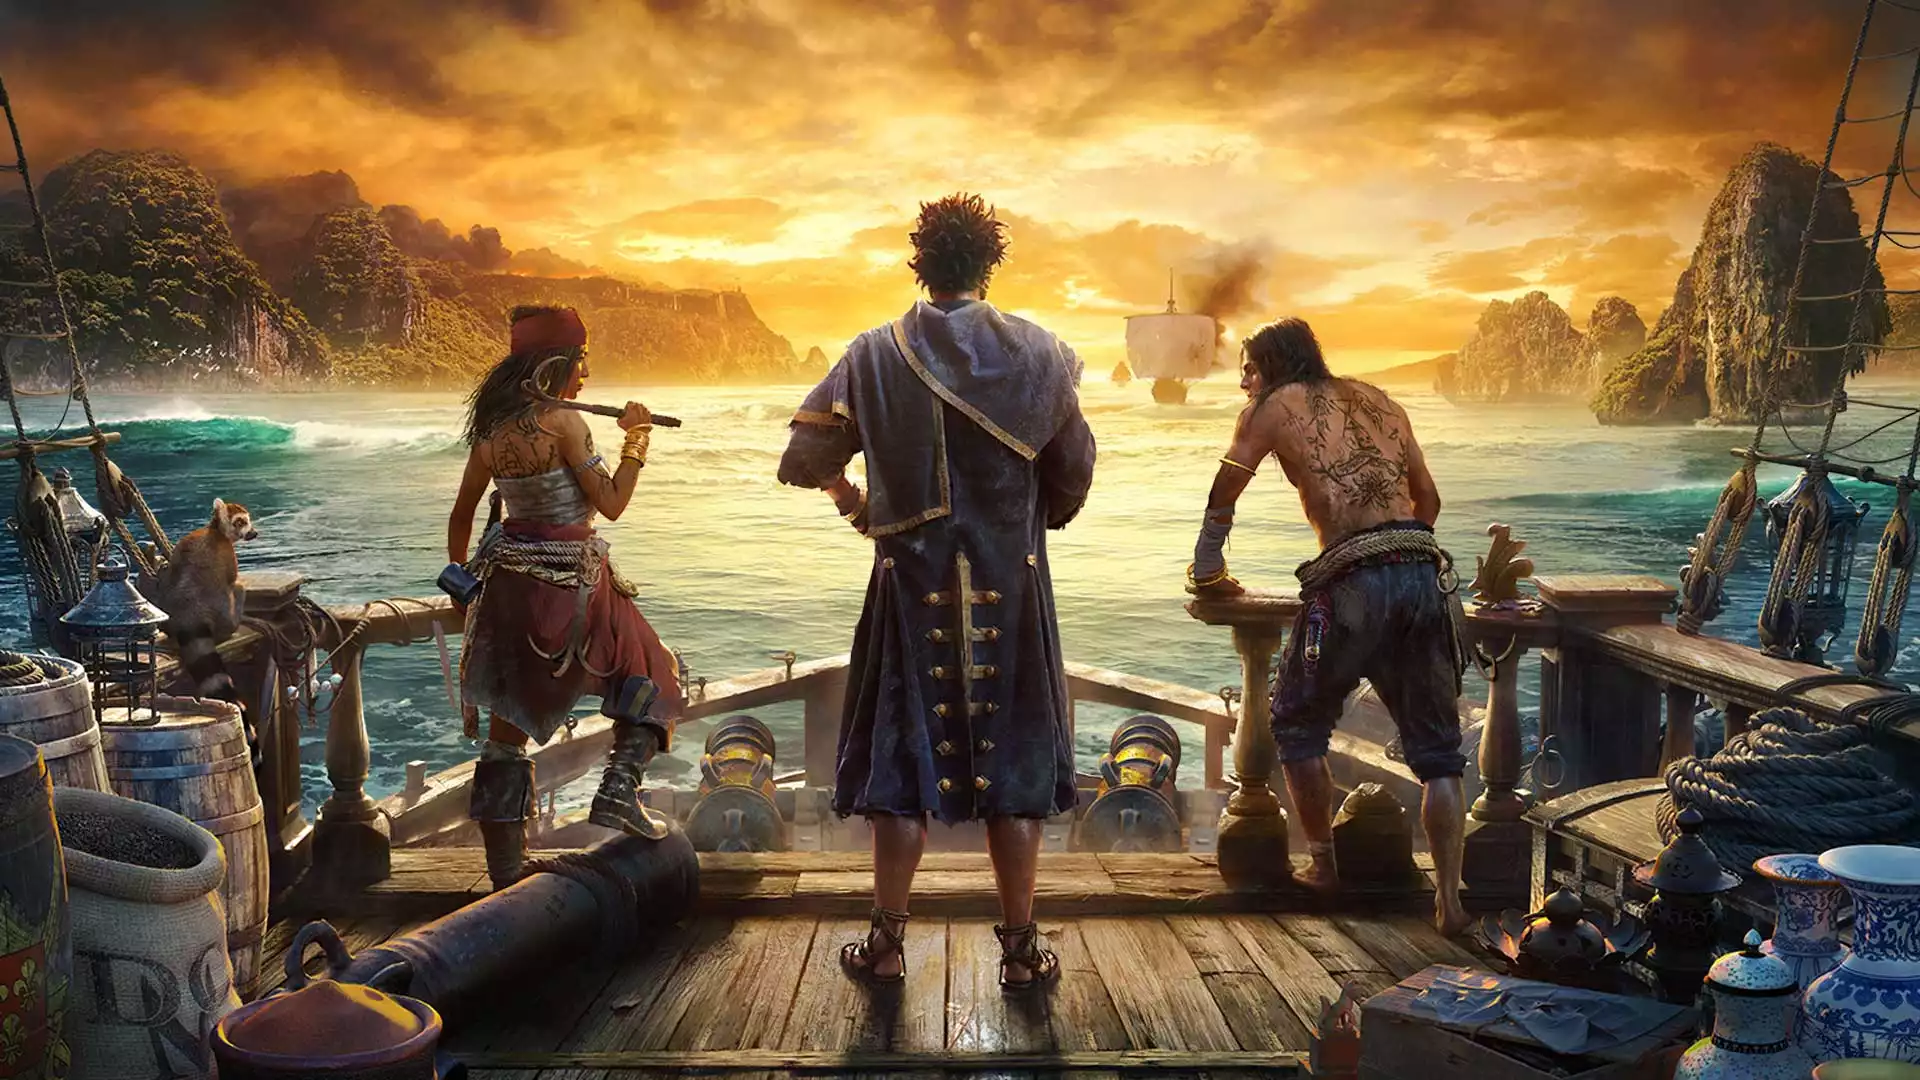 11 best pirate games to play in 2023: Assassin's Creed Black Flag, Pillars of Eternity II: Deadfire & more